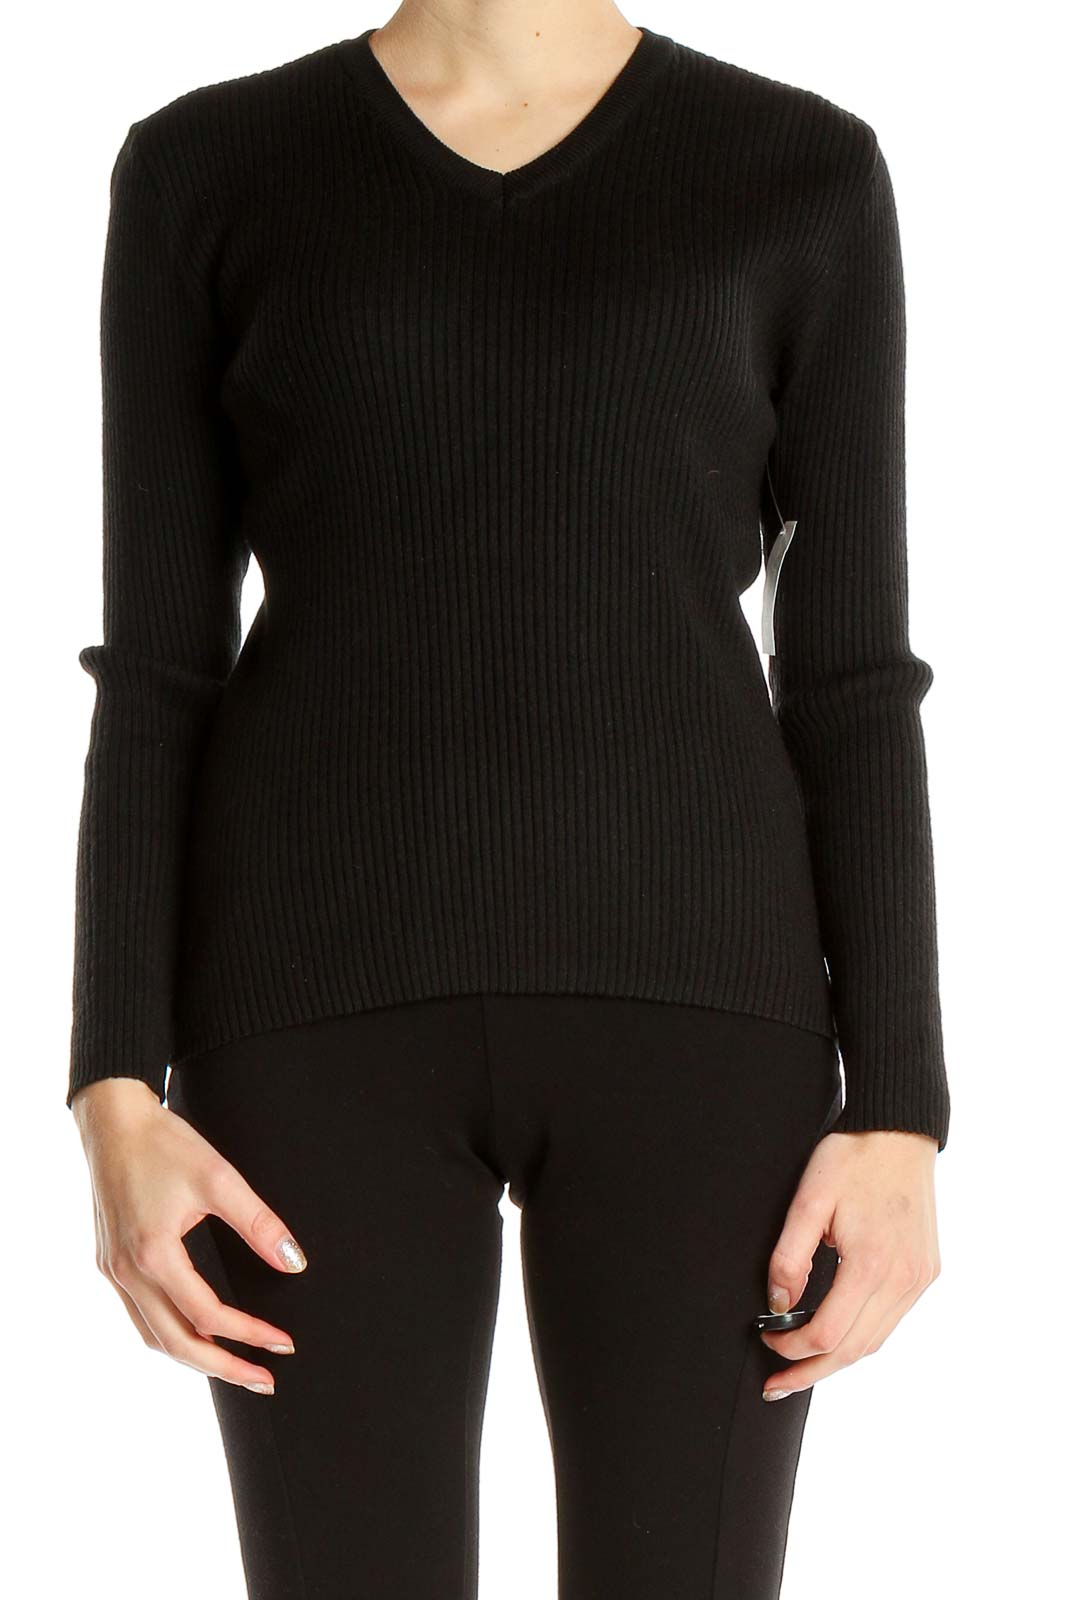 Black All Day Wear Sweater Front